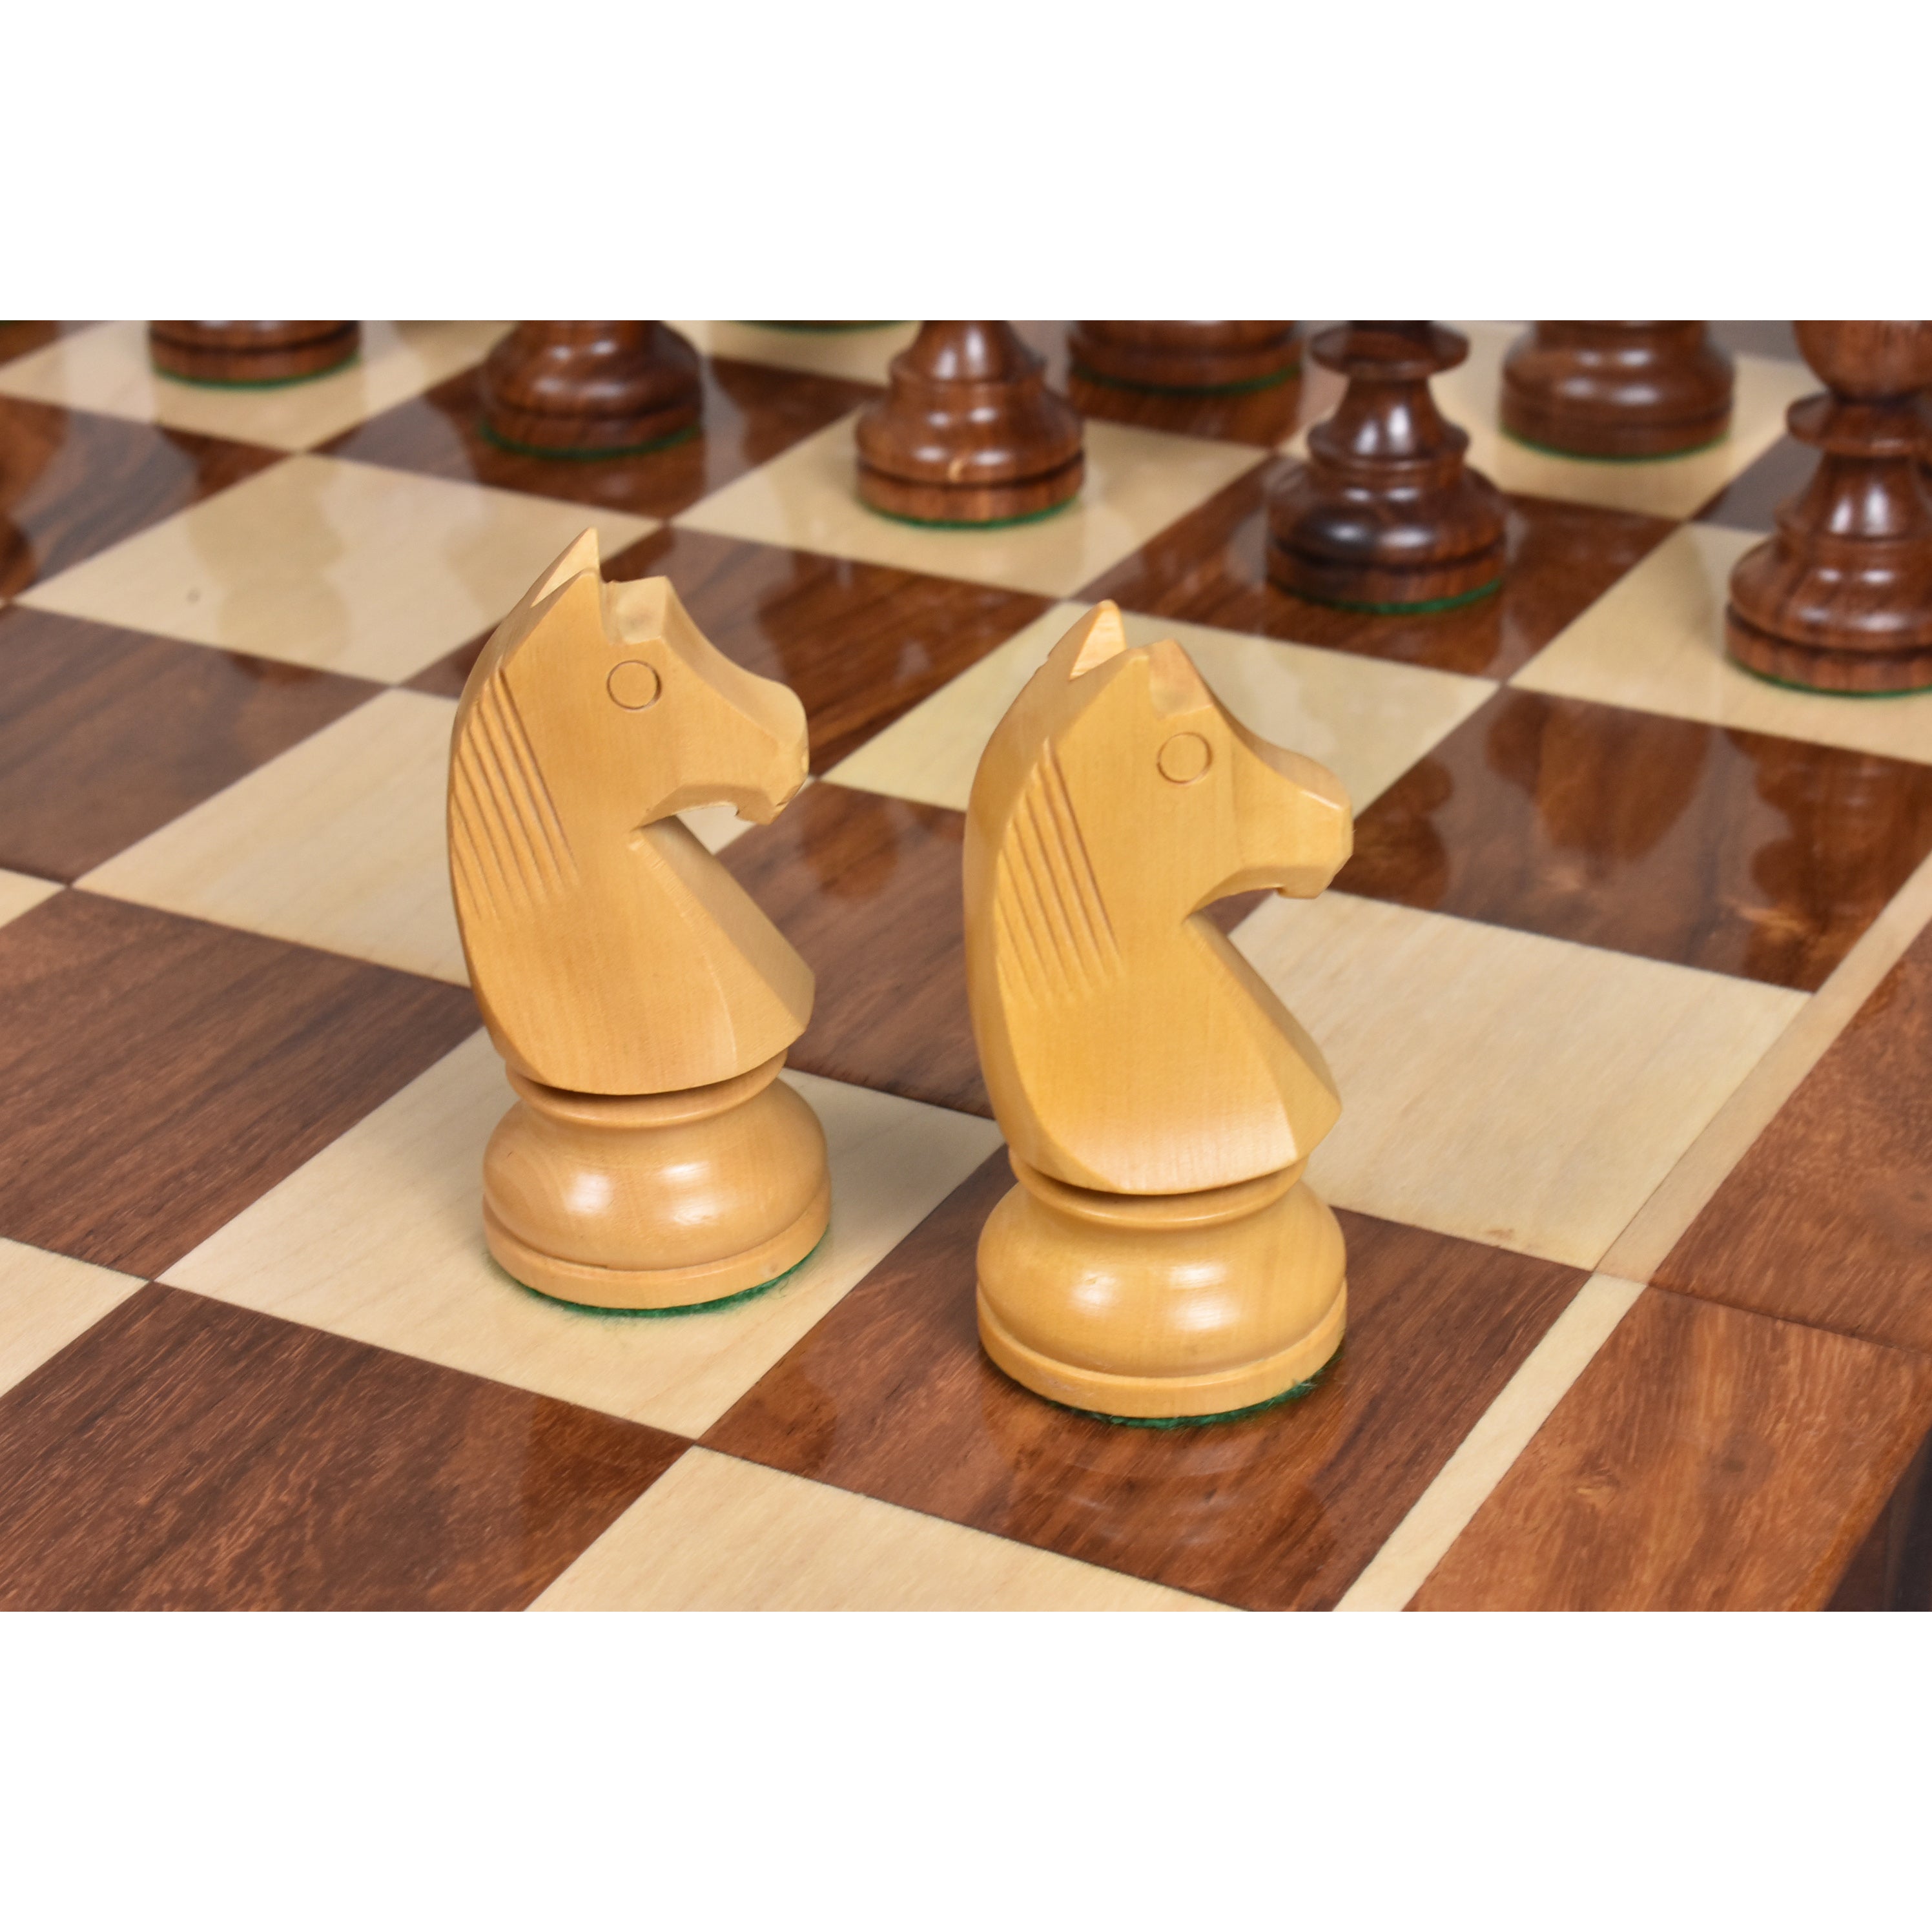 ROYAL GAMBIT Incrusted Large Wooden Chess Set 50cm / 20in Luxury Chess Board